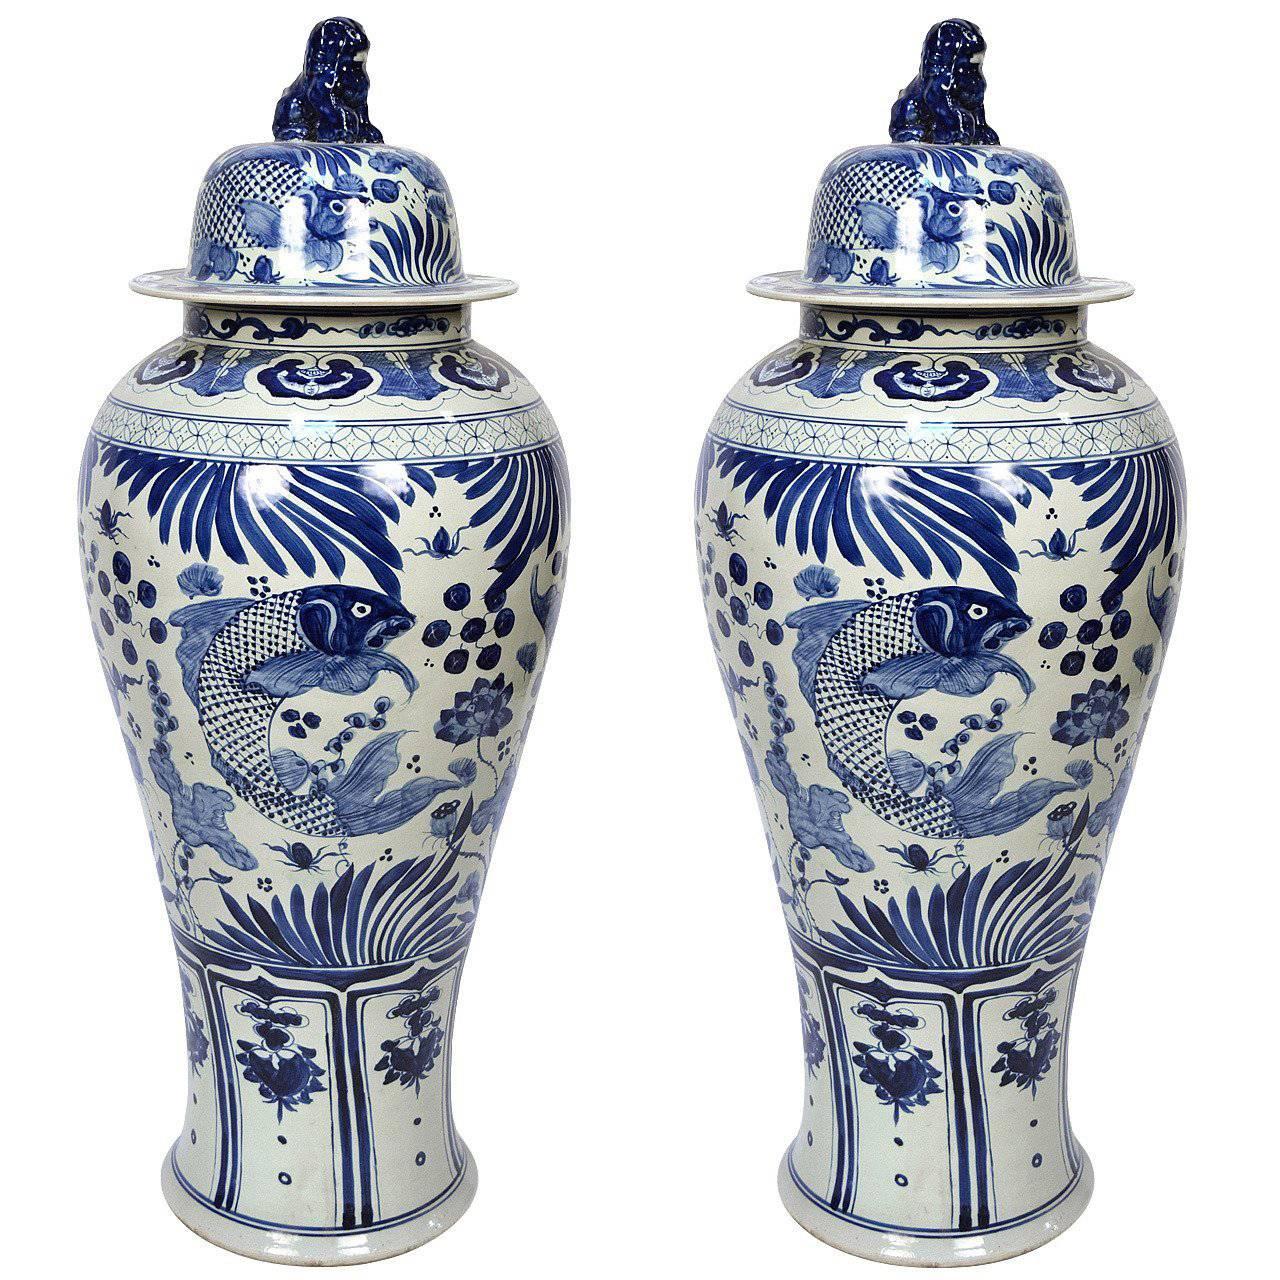 Pair of Chinese Monumental Blue and White Fish Jars with Shizi Tops